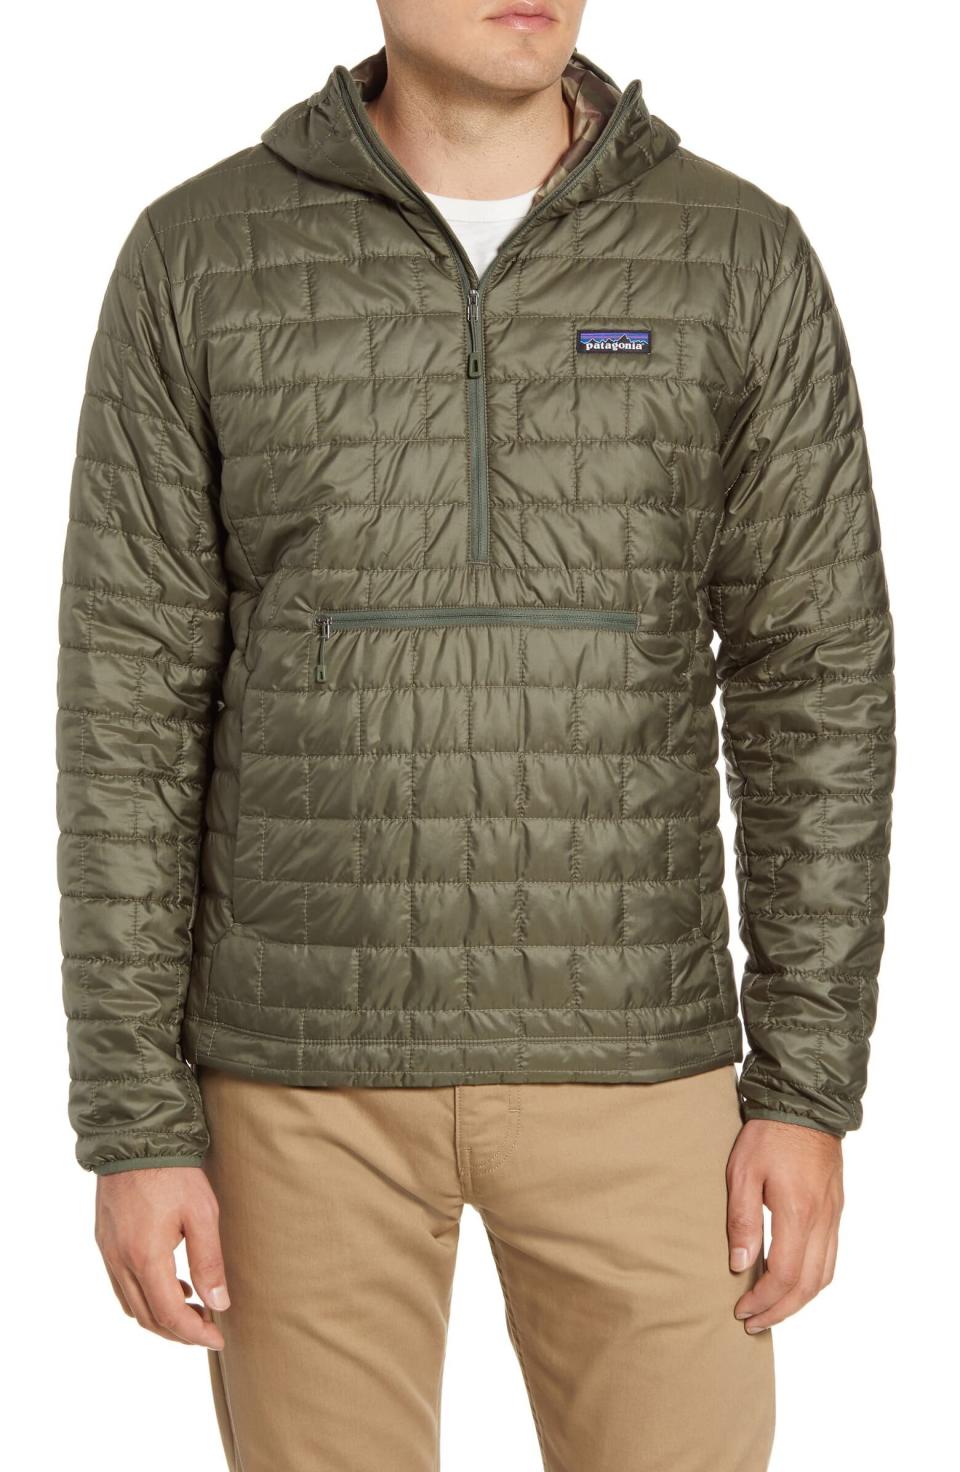 This <a href="https://fave.co/2unNZNE" target="_blank" rel="noopener noreferrer">Patagonia pullover jacket</a> has a shell that's made from recycled fabric and is insulated with partially recycled Primaloft.&nbsp; (Photo: Nordstrom )